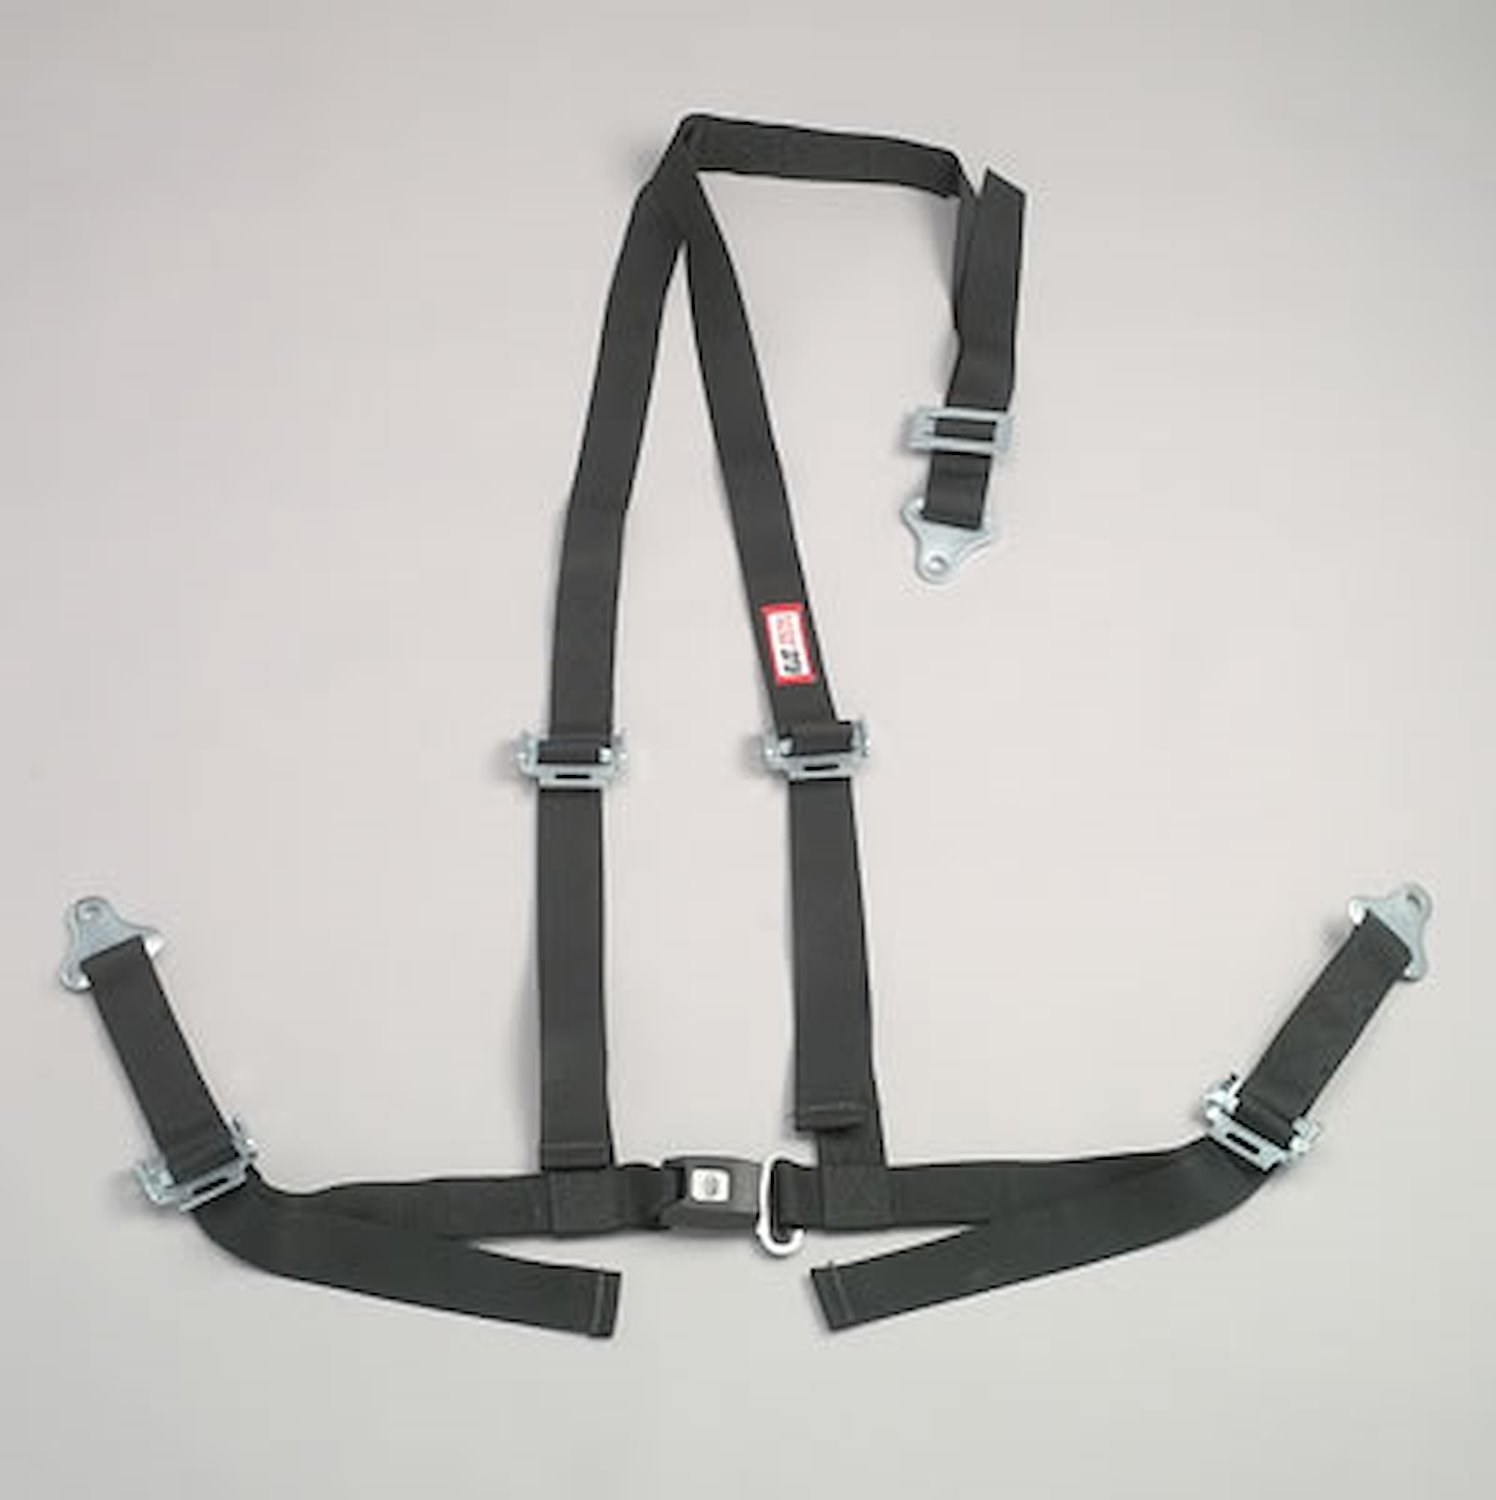 NON-SFI B&T HARNESS 2 PULL DOWN Lap Belt 2 S.H. INDIVIDUAL FLOOR Mount ALL WRAP ENDS GRAY